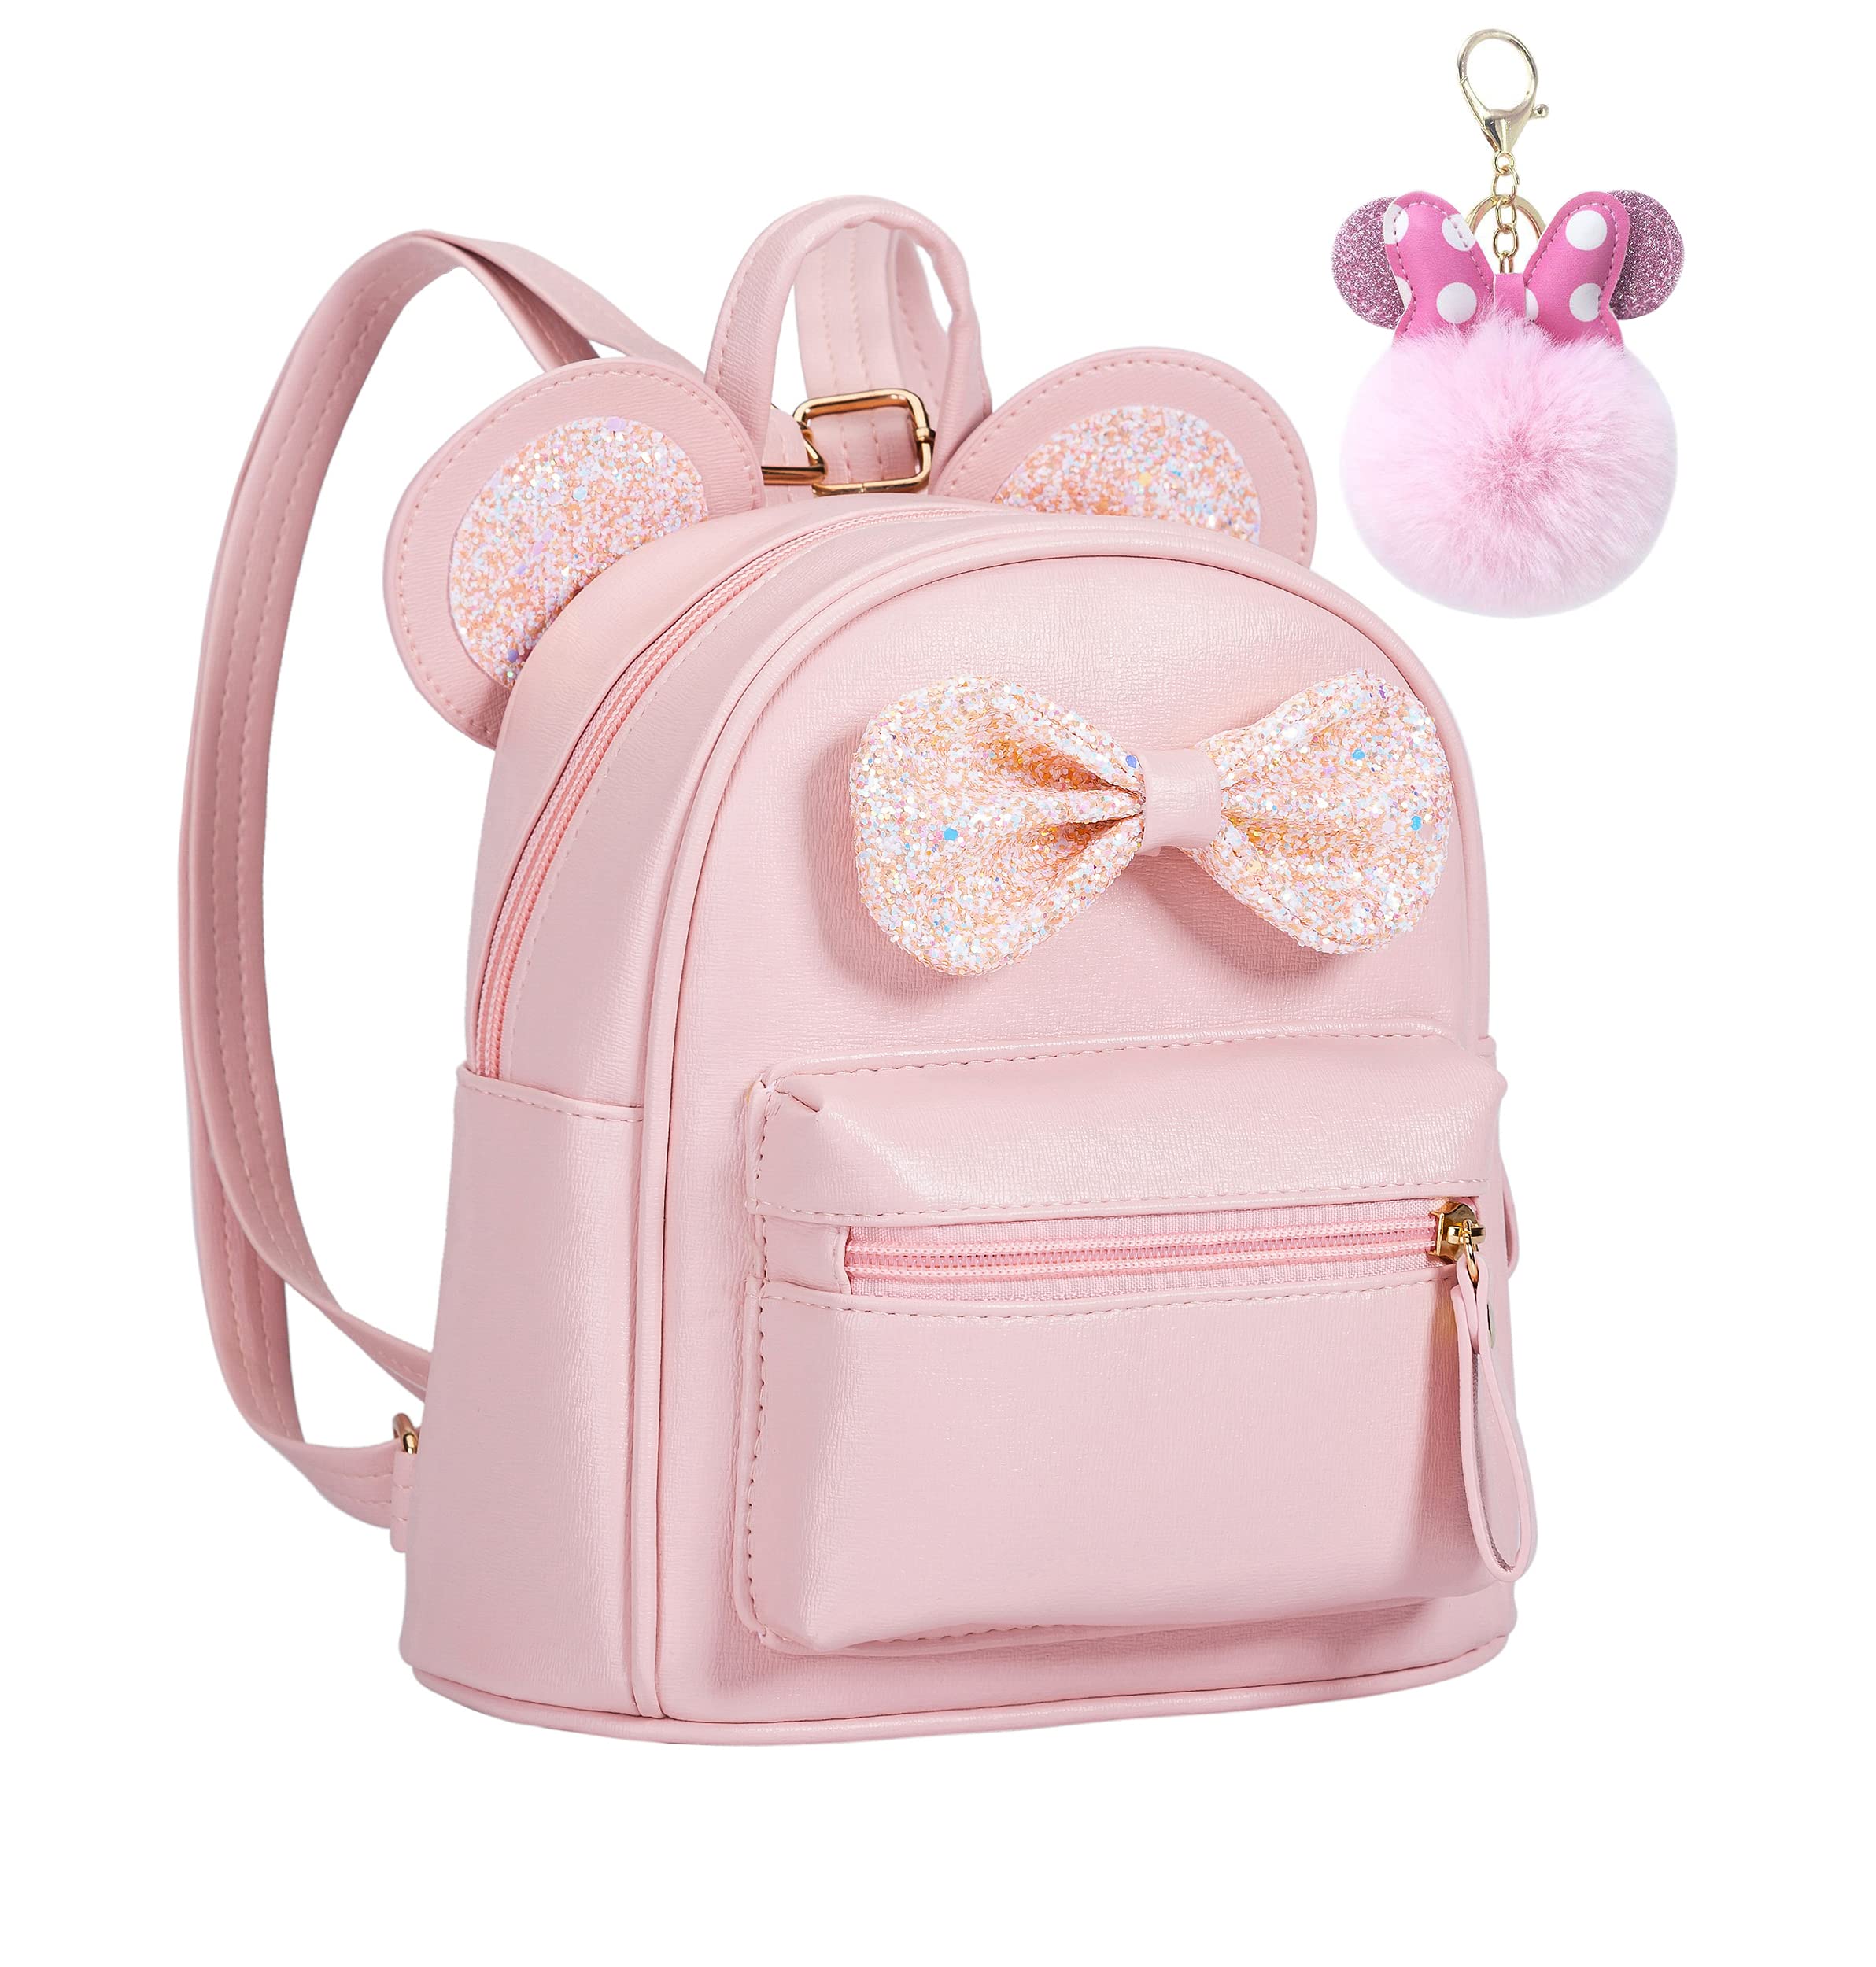 A , Trendy, Mini, Purse, Handles, Removeable Strap, Zipper Closure, Cute,  Small Bag, Toddlers, Girls, Pre-teen, Birthday, Christmas 